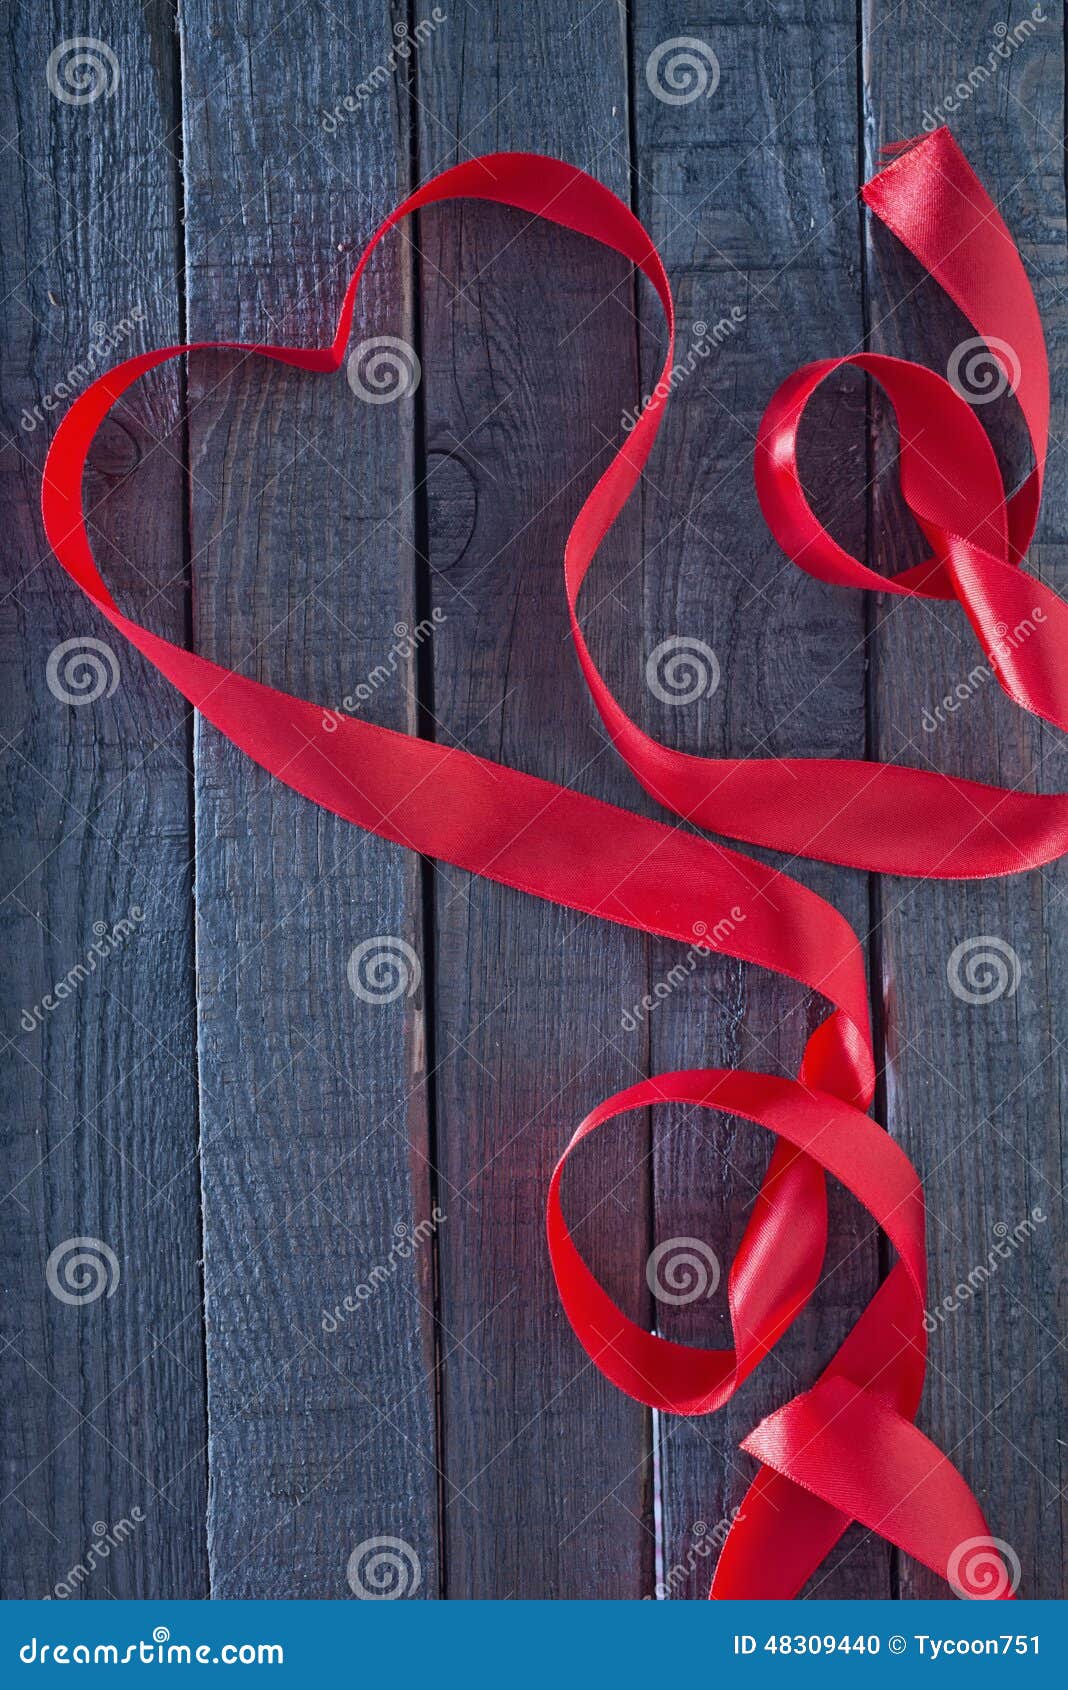 Red ribbon stock photo. Image of ornate, concept, design - 48309440